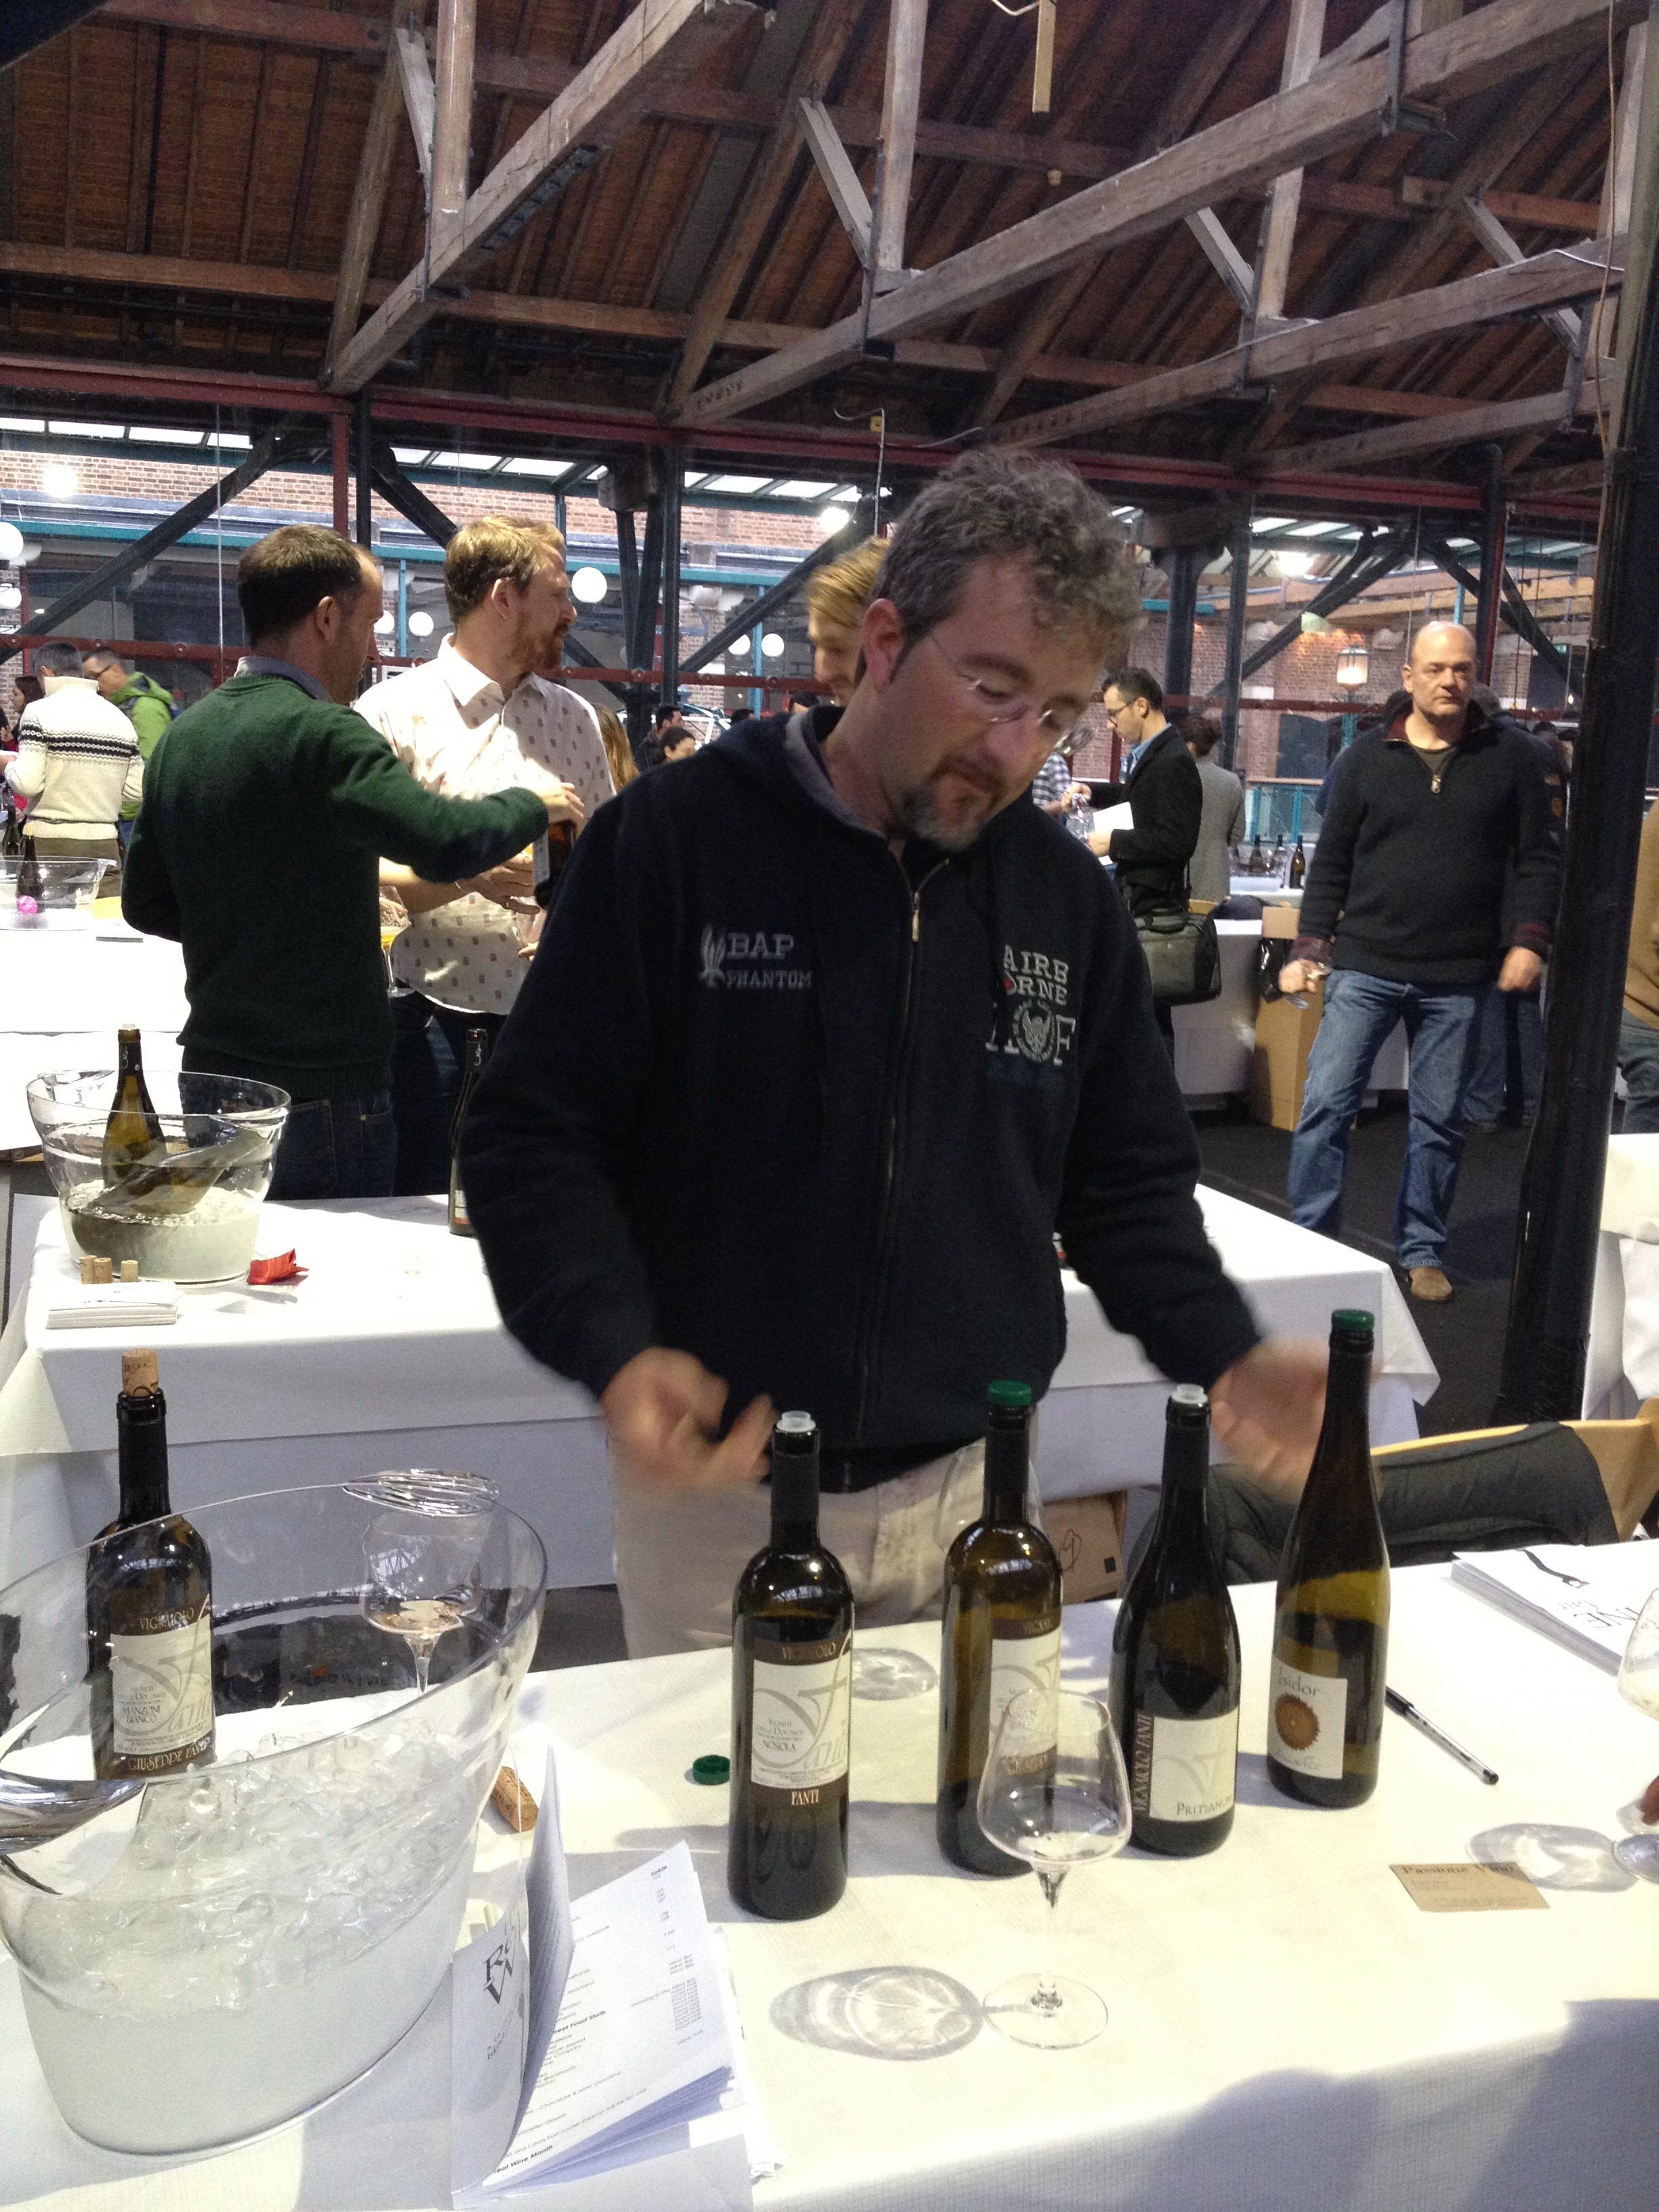 One of the genuinely friendly wine producers at the Real Wine Fair